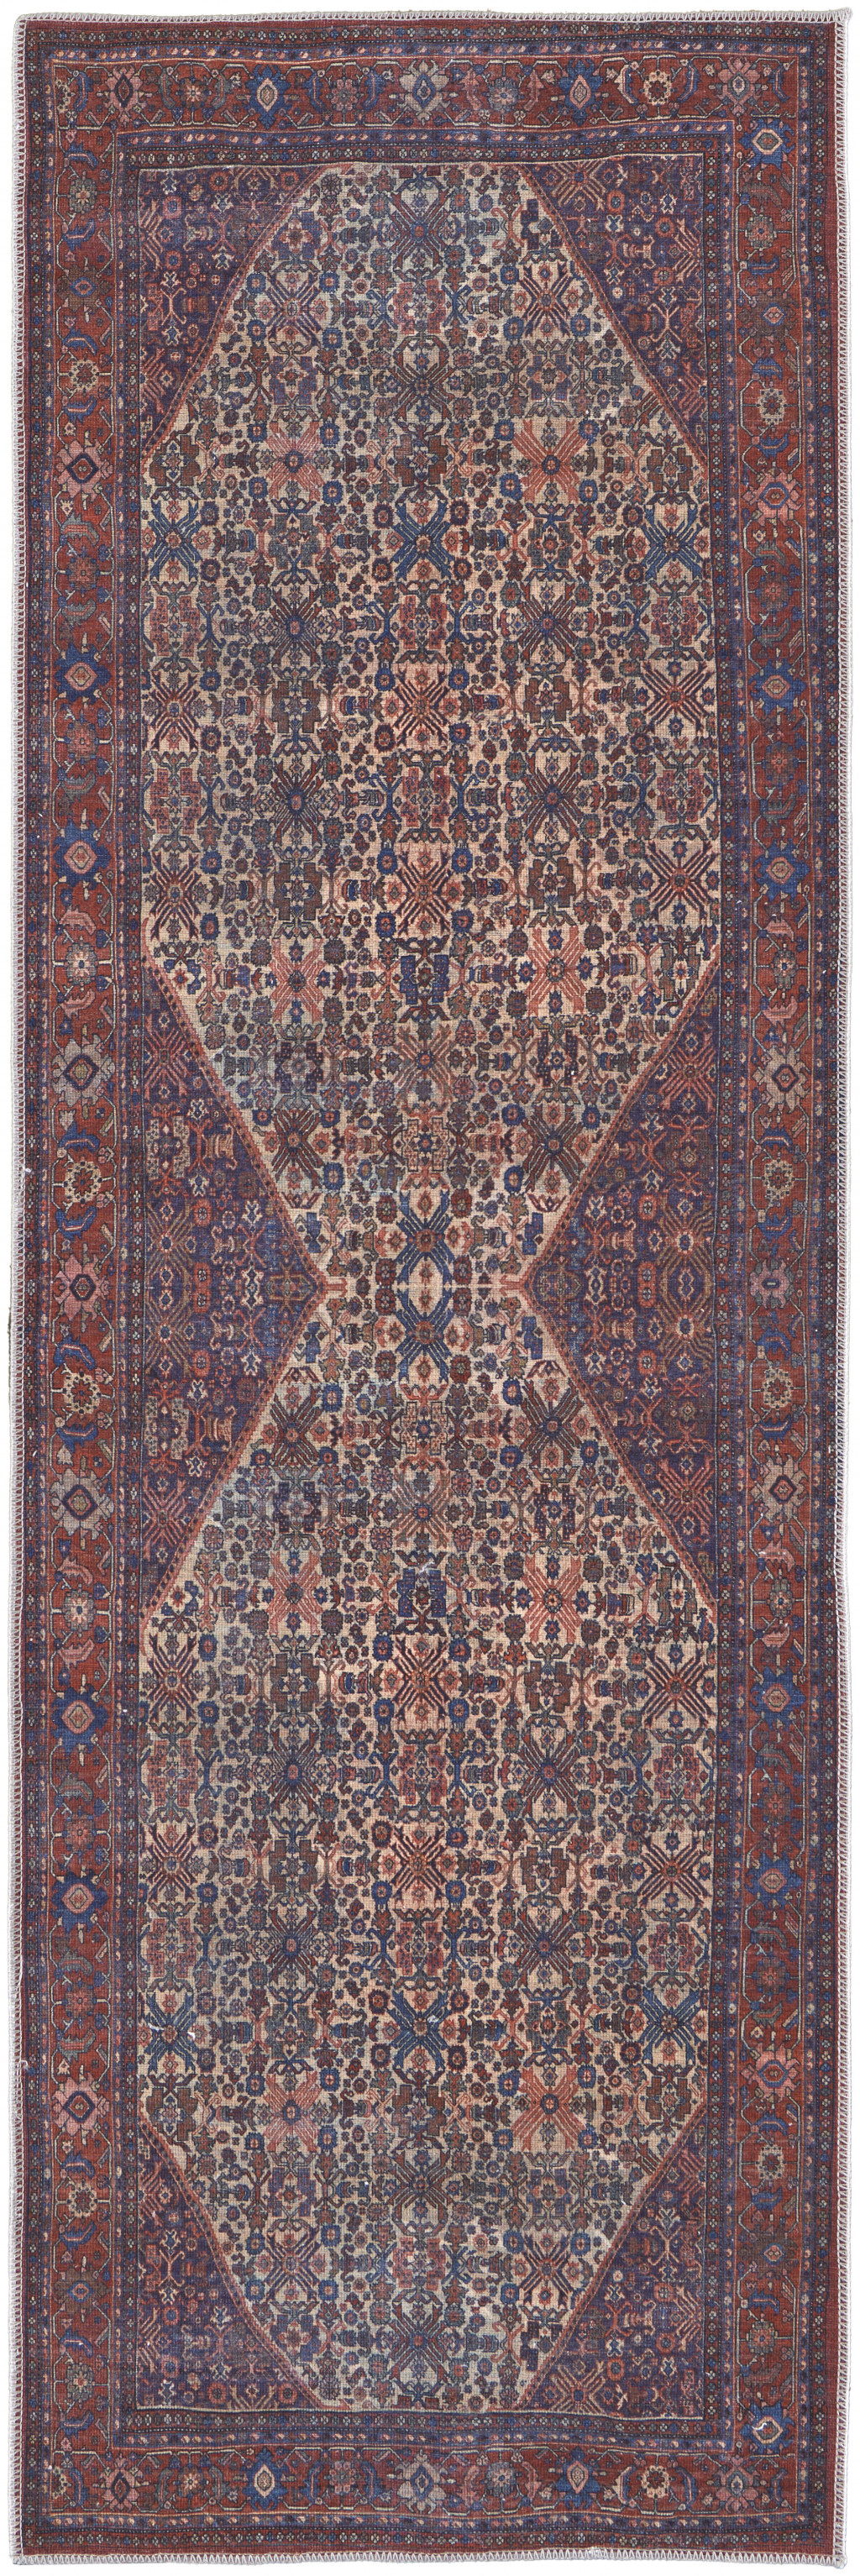 8' Red Tan And Blue Floral Power Loom Runner Rug-515131-1